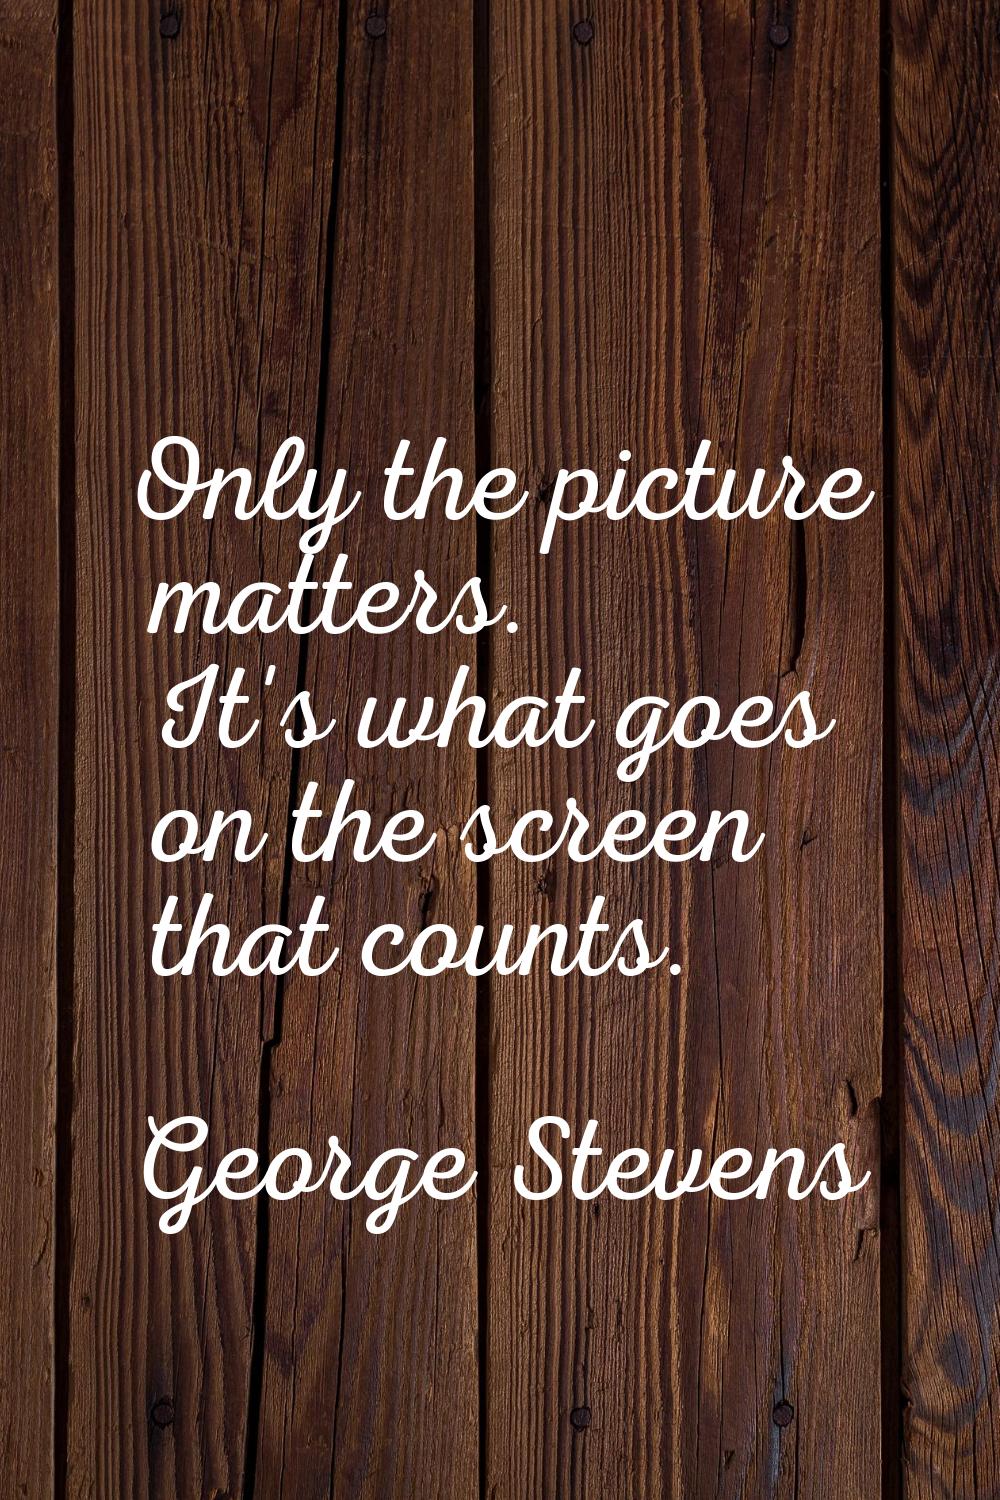 Only the picture matters. It's what goes on the screen that counts.